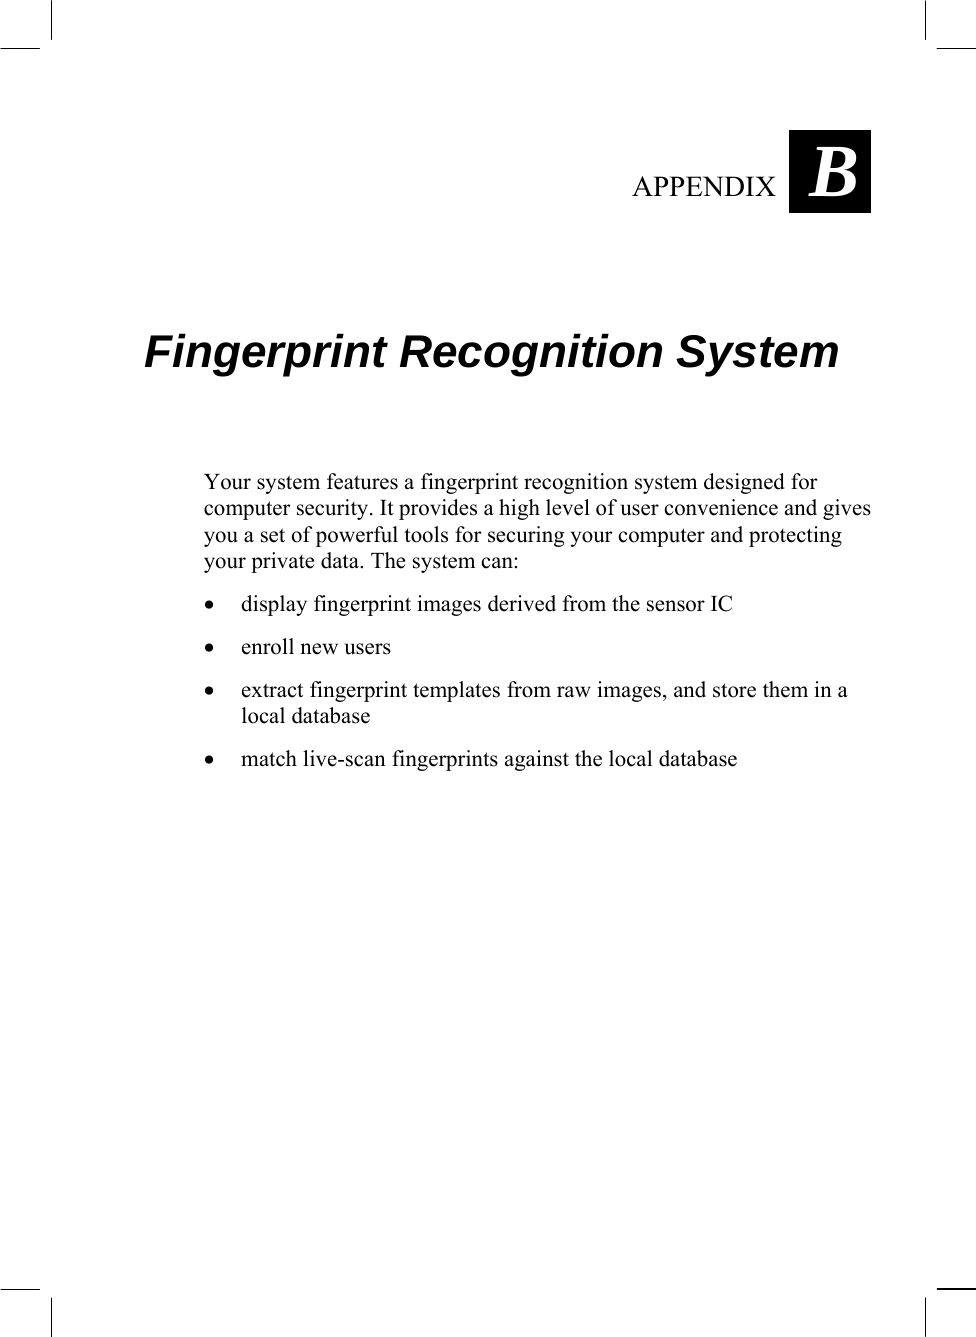   APPENDIX B Fingerprint Recognition System Your system features a fingerprint recognition system designed for computer security. It provides a high level of user convenience and gives you a set of powerful tools for securing your computer and protecting your private data. The system can: •  display fingerprint images derived from the sensor IC •  enroll new users •  extract fingerprint templates from raw images, and store them in a local database •  match live-scan fingerprints against the local database 